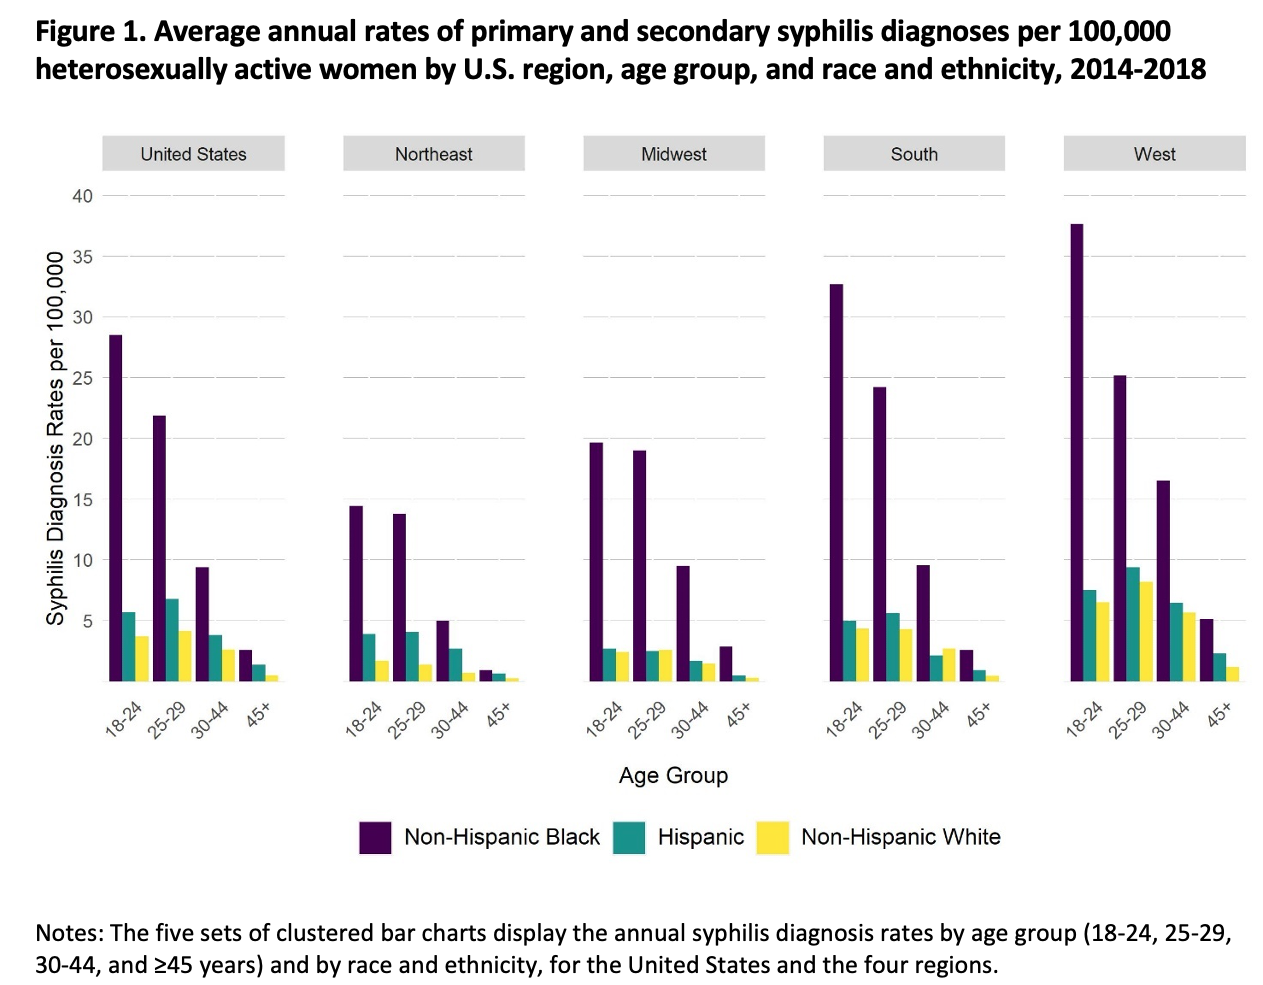 Variation in Patterns of Racial and Ethnic Disparities in Primary and Secondary Syphilis Diagnosis Rates Among Heterosexually Active Women by Region and Age Group in the United States